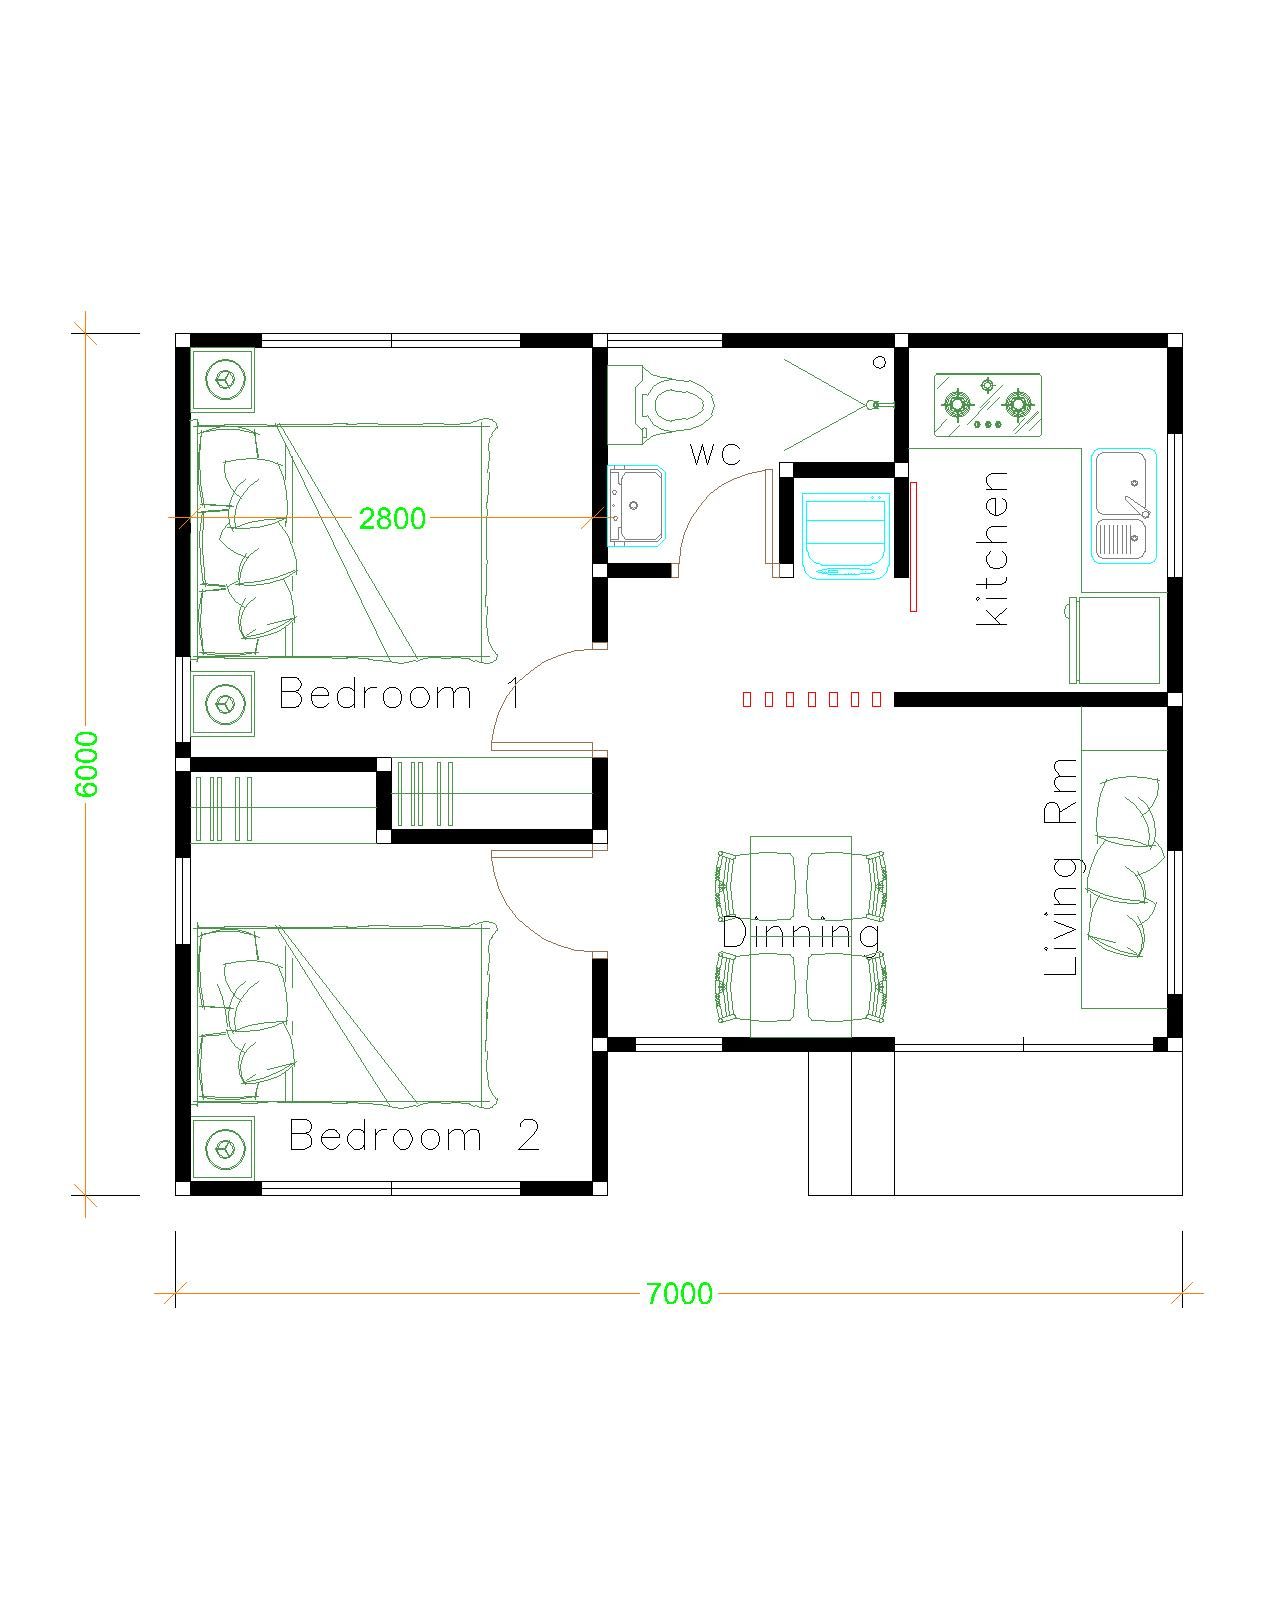 House Plans Design 7x6 with 2 Bedrooms Hip Roof layout floor plan